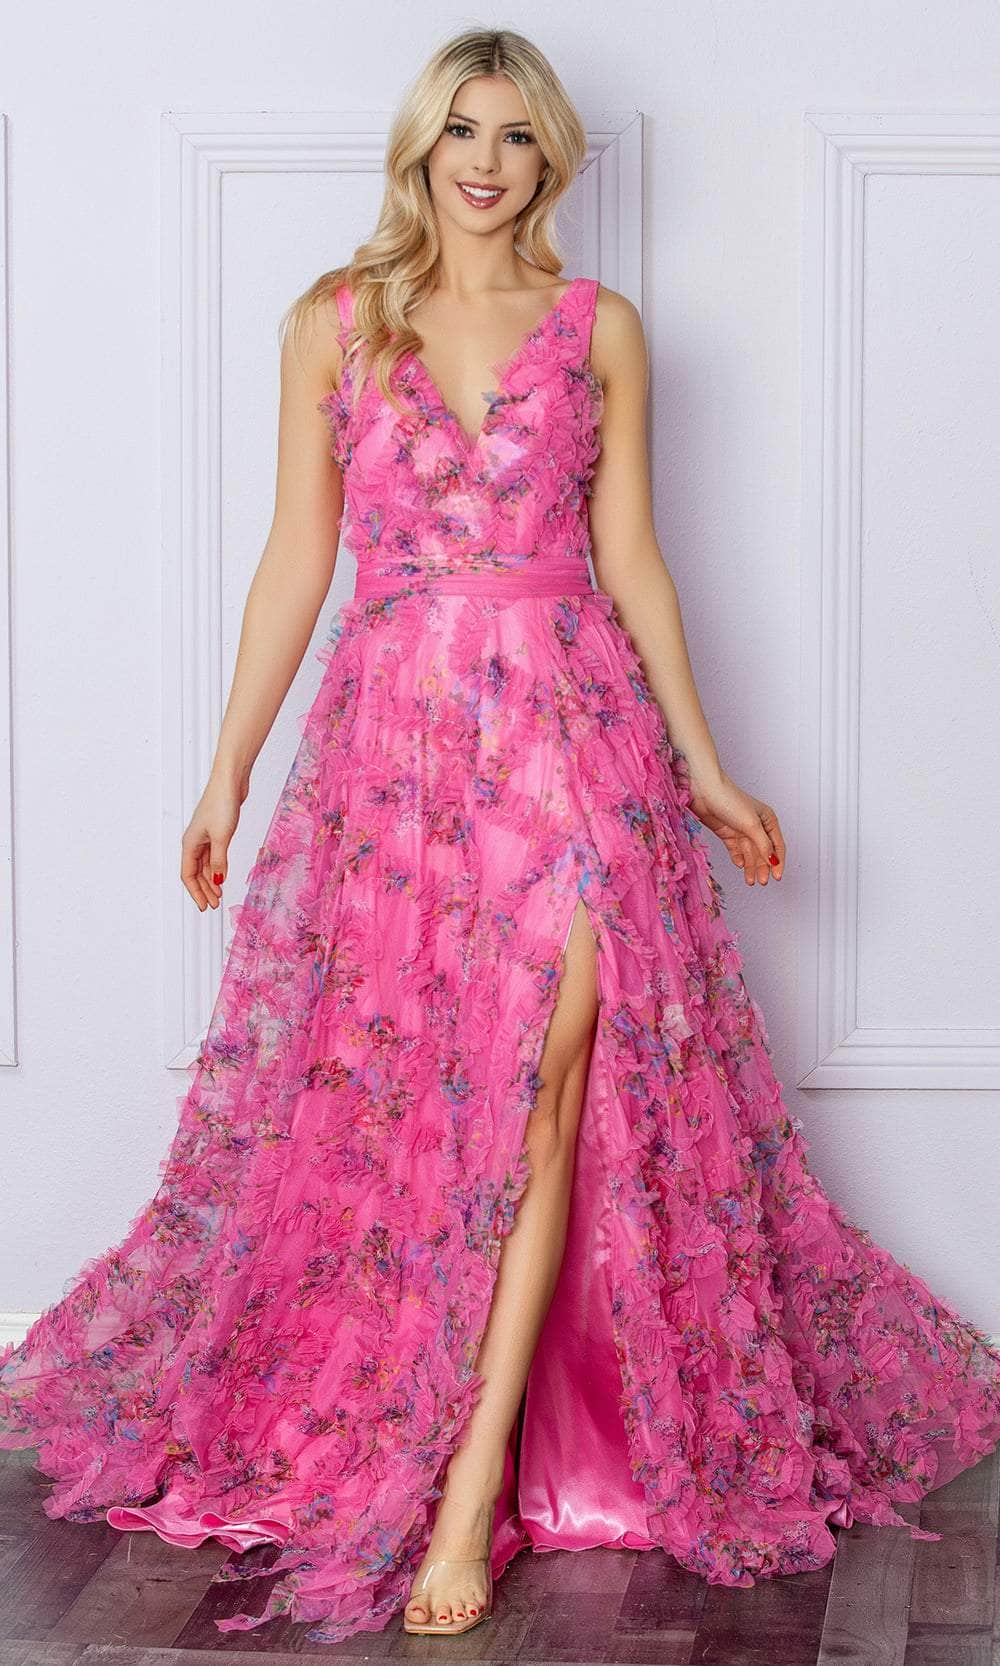 Image of Nox Anabel E1445 - Floral Print Ruffles Prom Dress